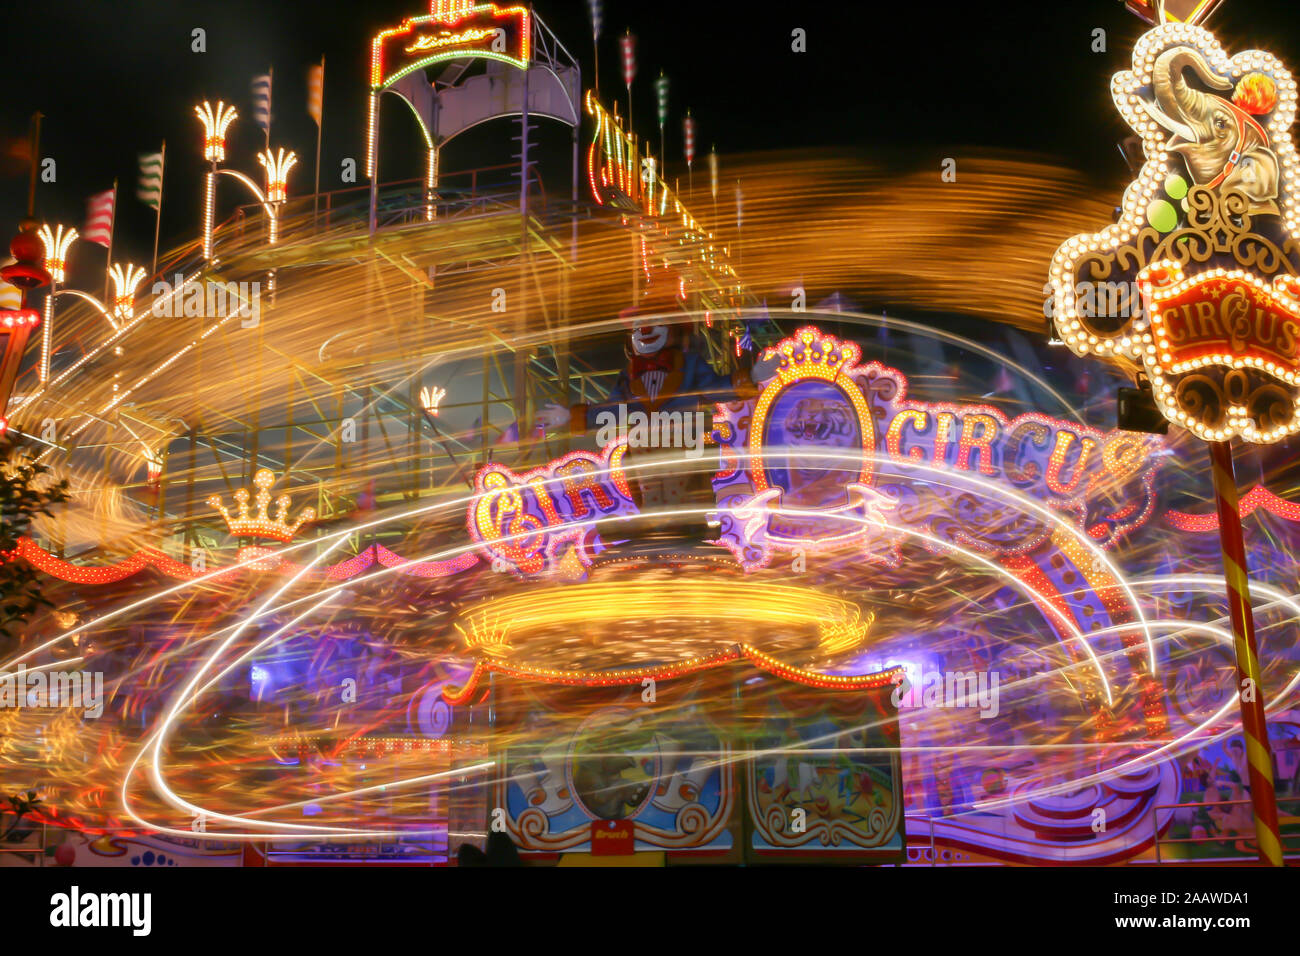 Carousel in motion. Shot with long exposure representing the lights as nice trails. Scene out of an amusement park at night. Stock Photo